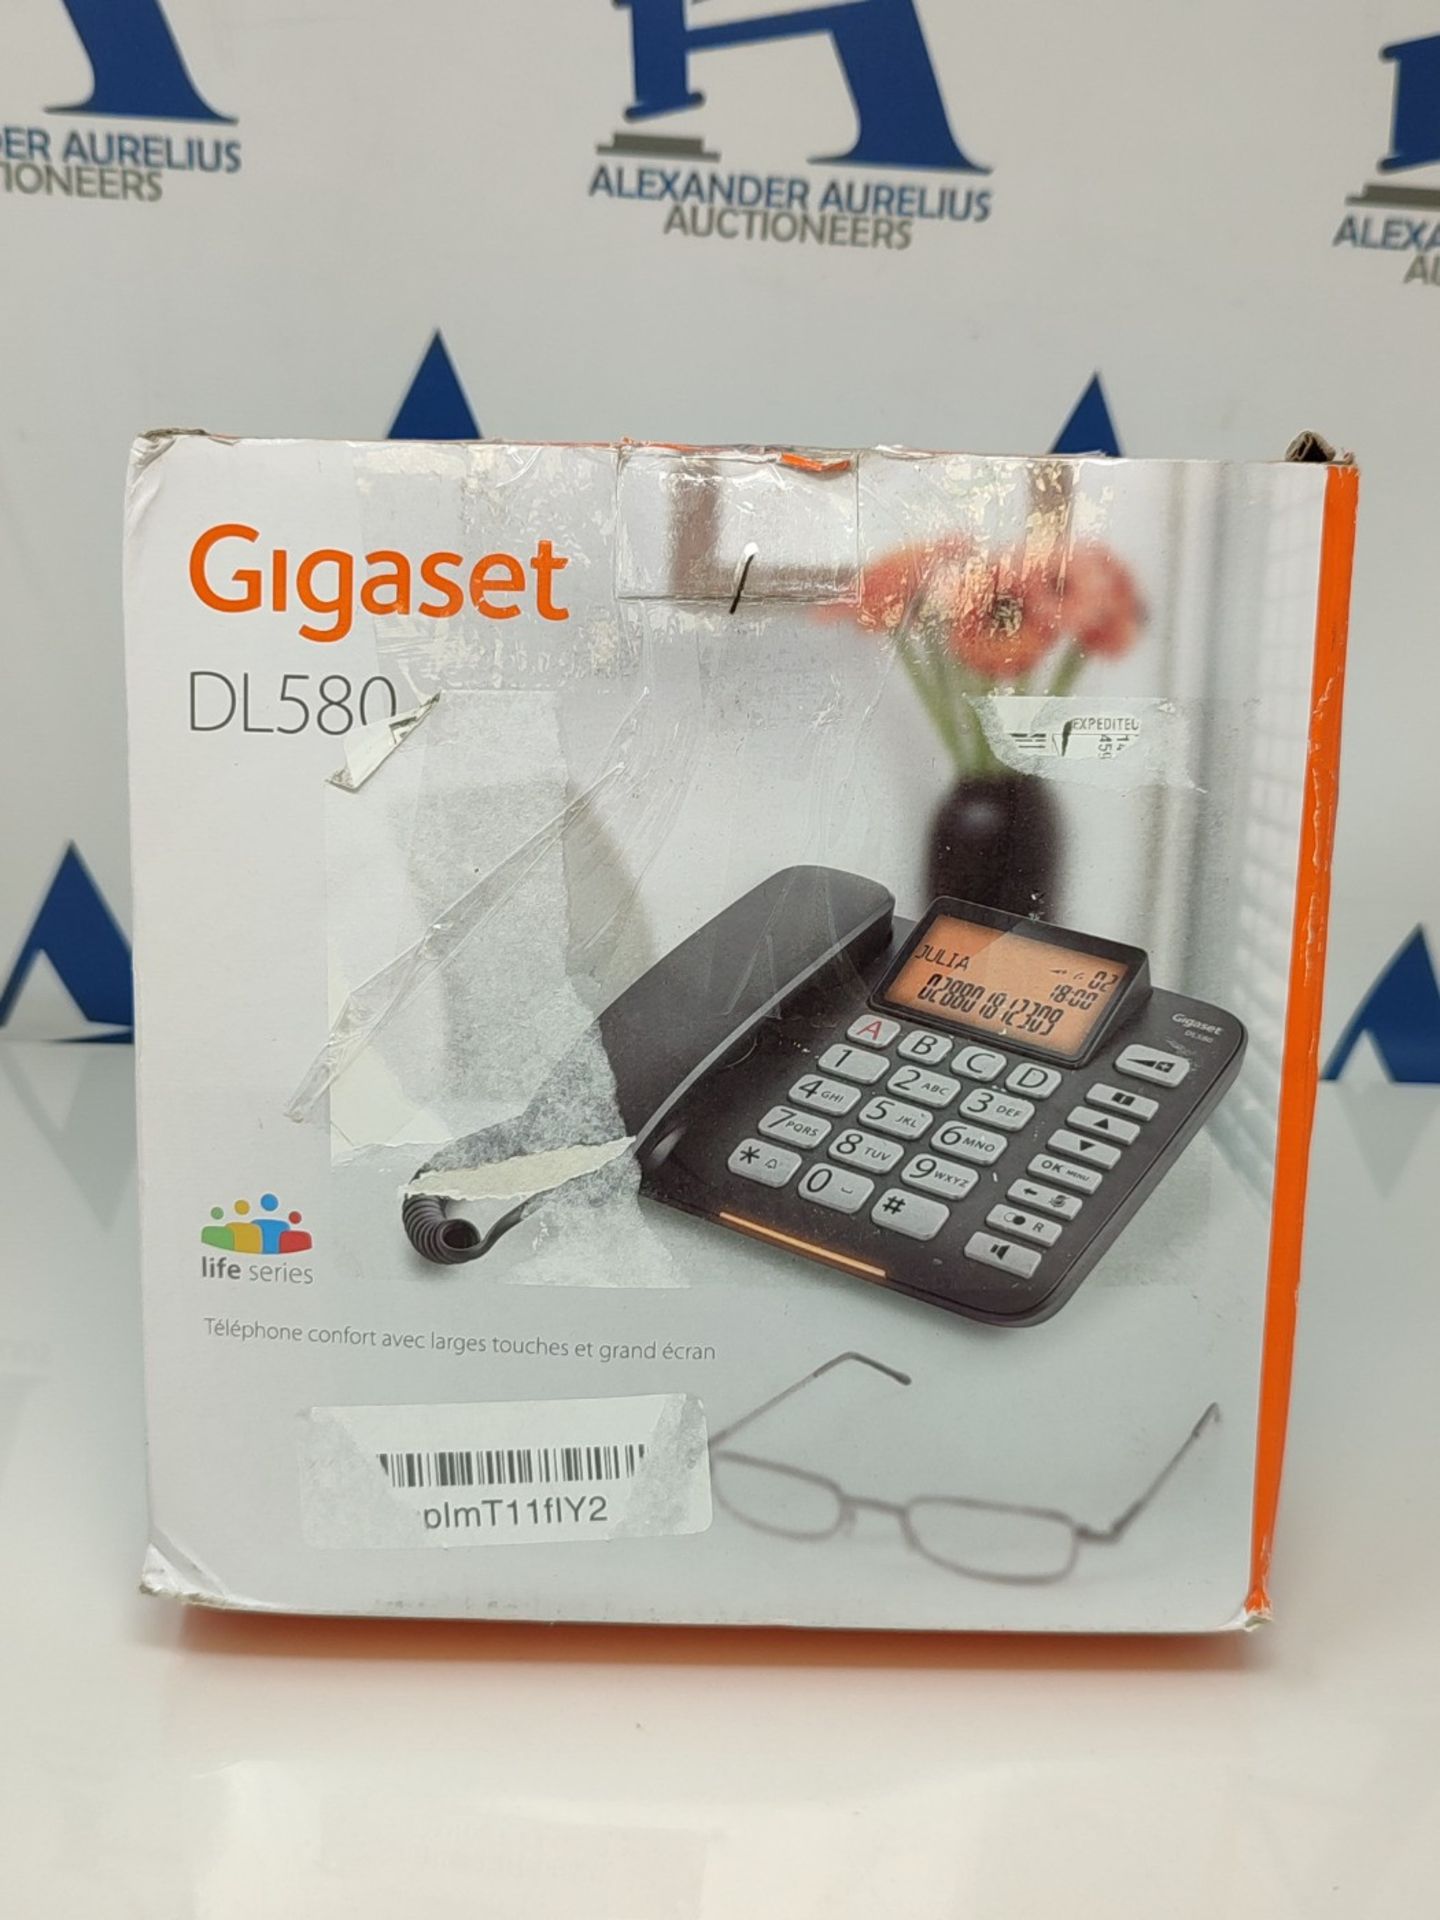 Gigaset DL580 Corded Telephone Black [French Version] - Image 6 of 6